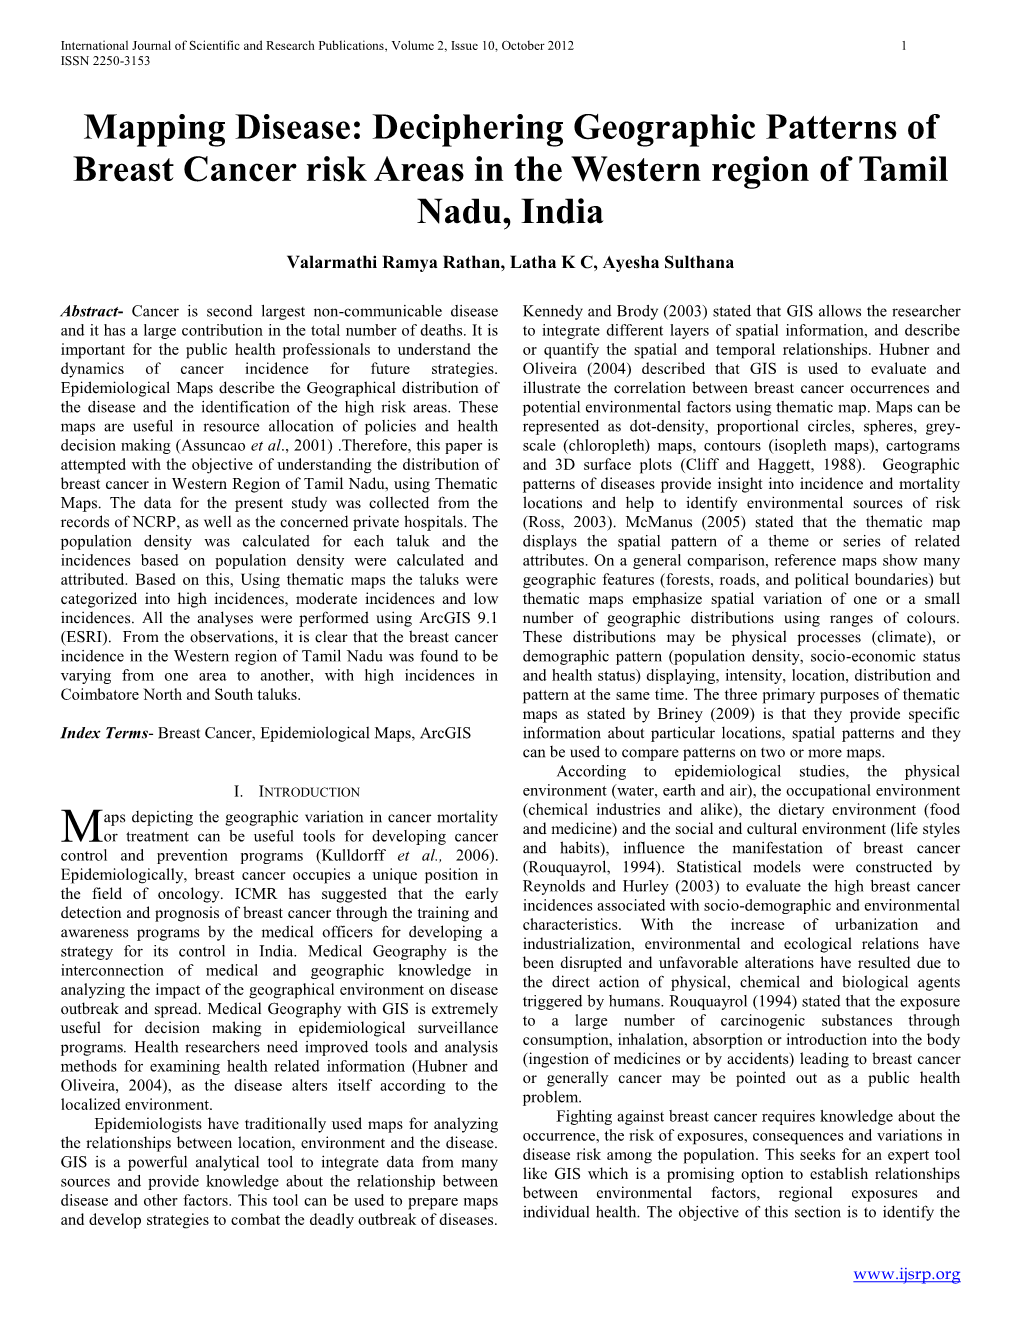 Deciphering Geographic Patterns of Breast Cancer Risk Areas in the Western Region of Tamil Nadu, India